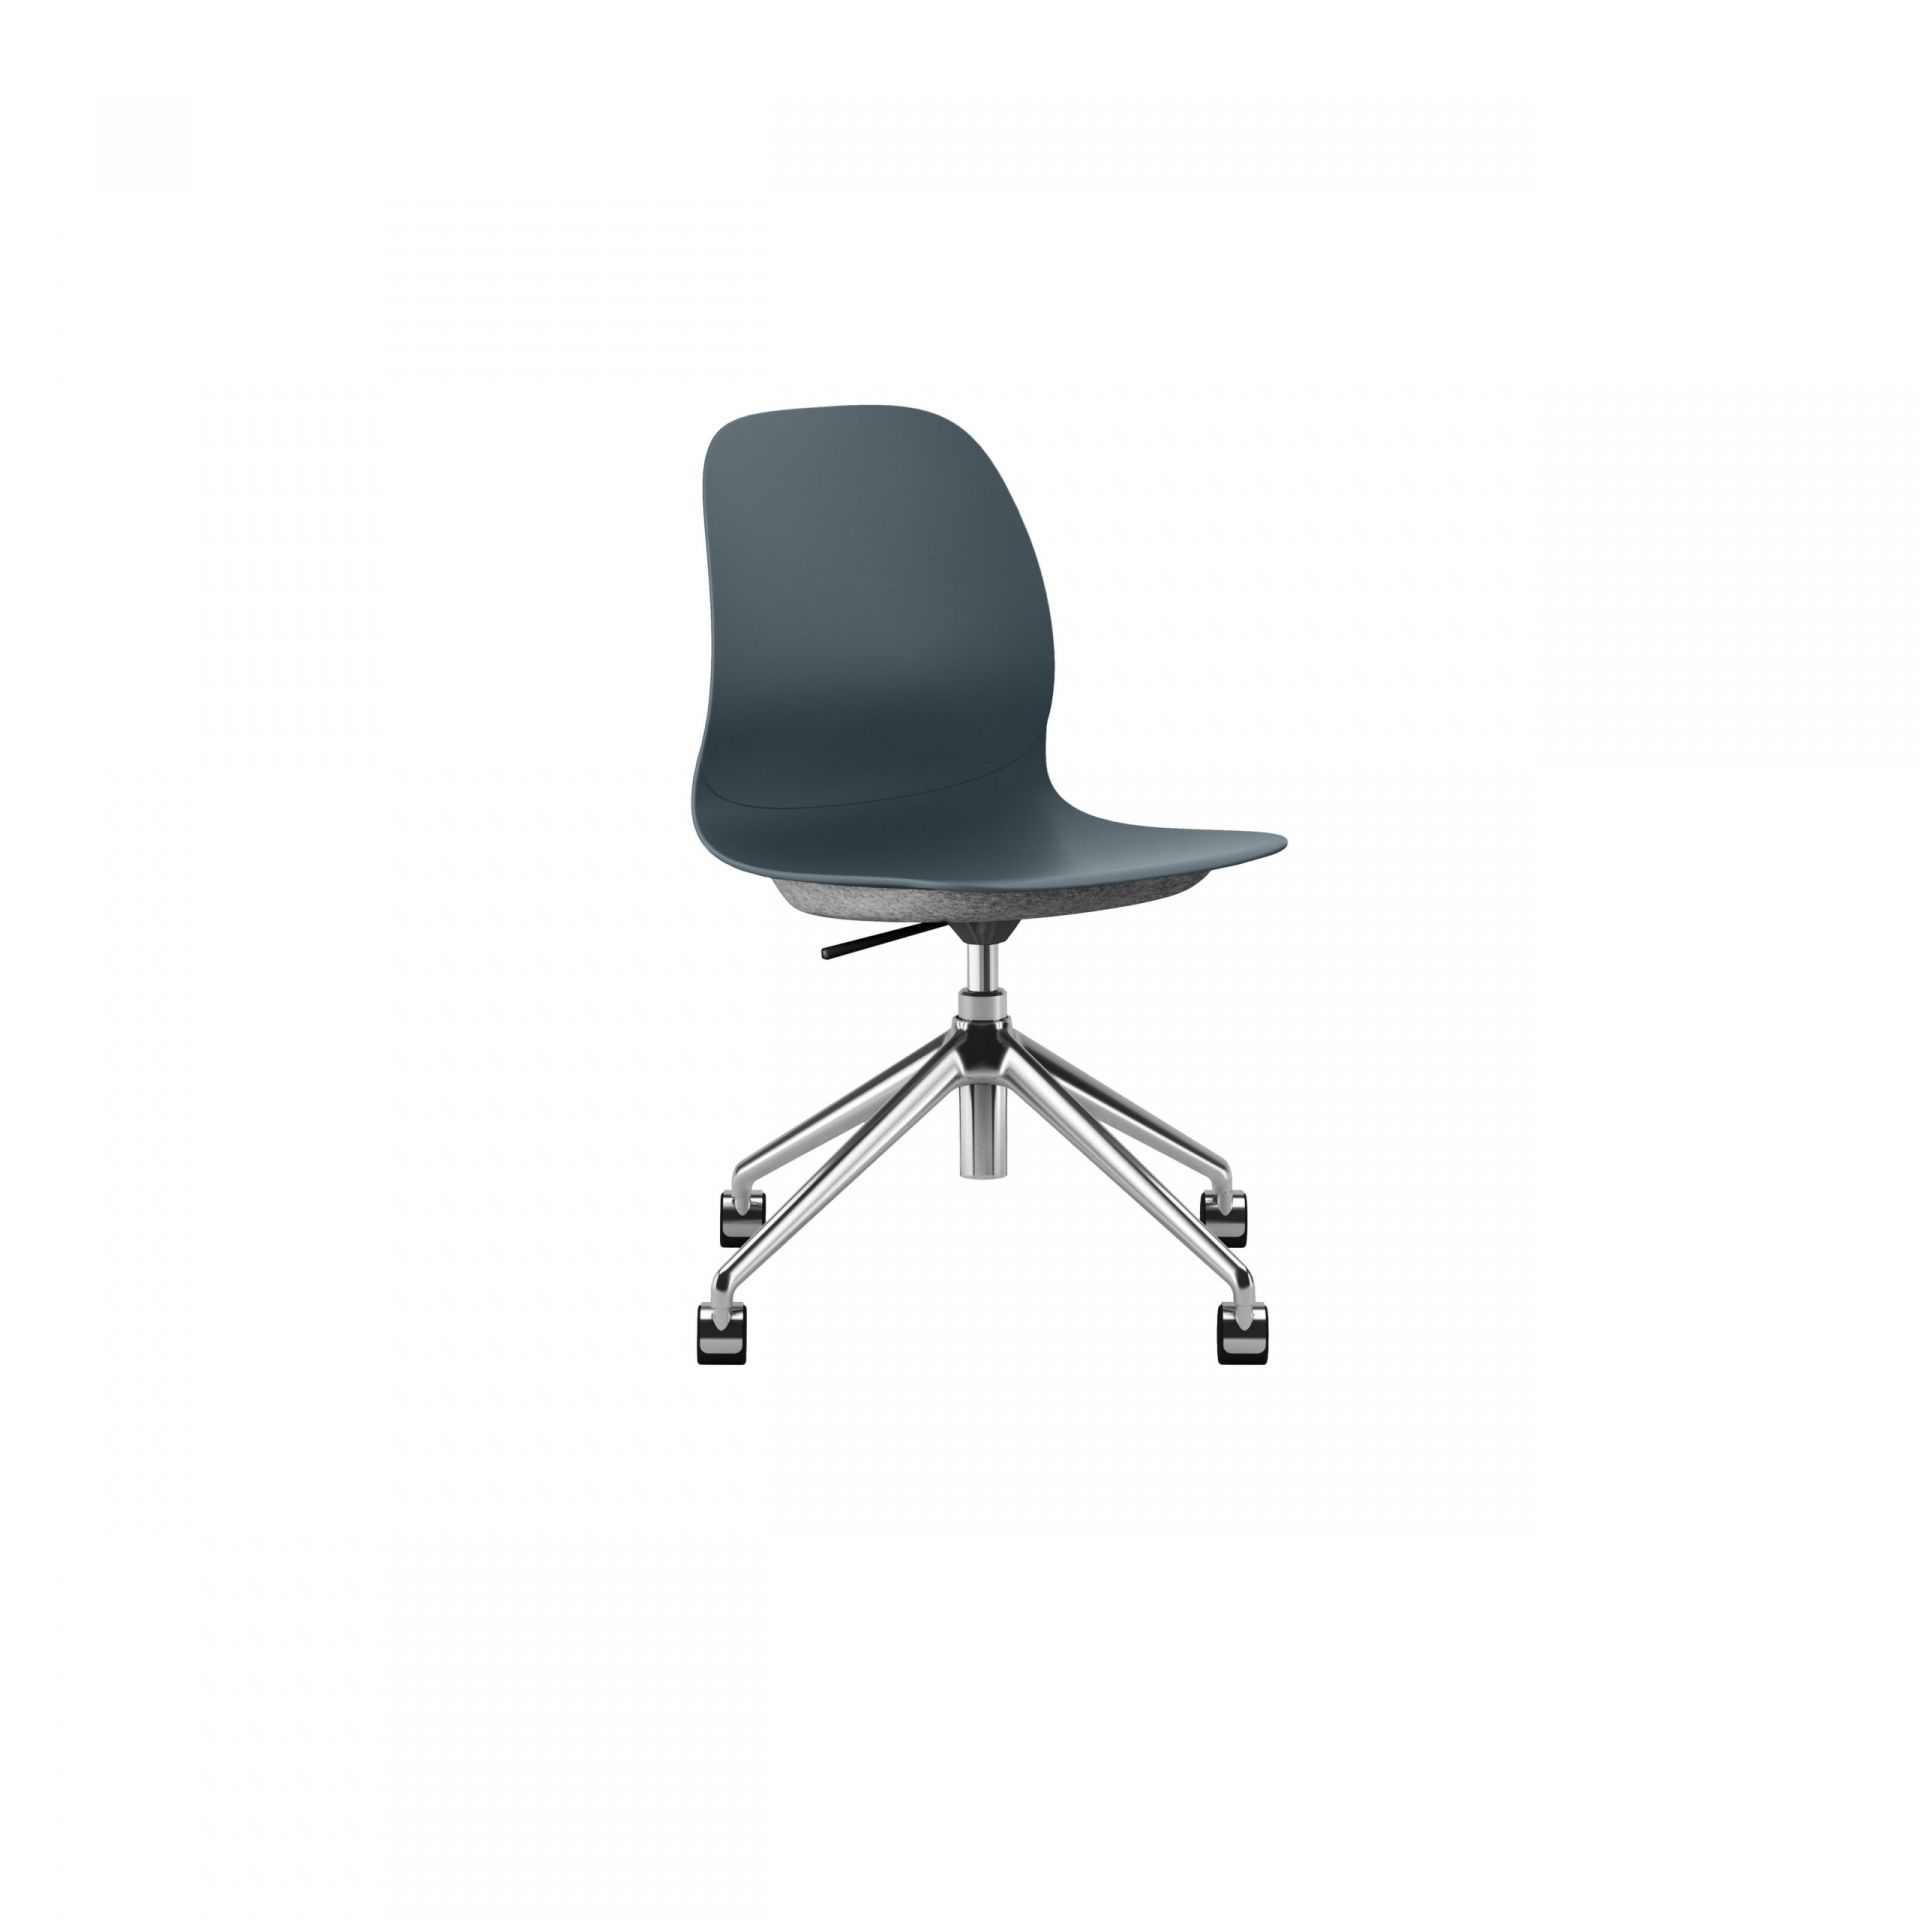 Archie Chair with swivel base product image 1